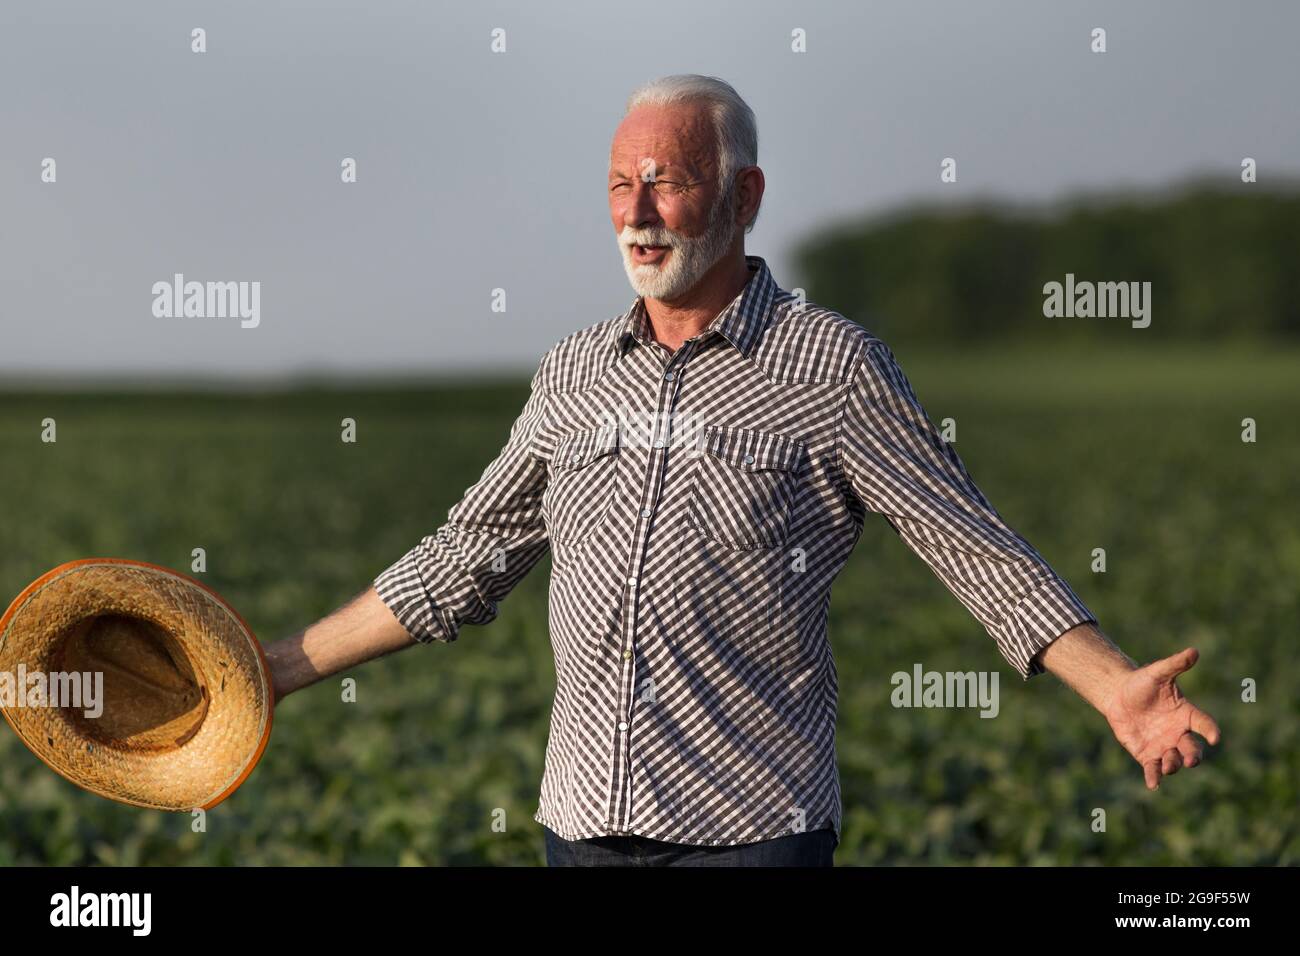 Senior farmer standing in soy field surveying land. Elderly agronomist standing with open arms holding straw hat. Stock Photo